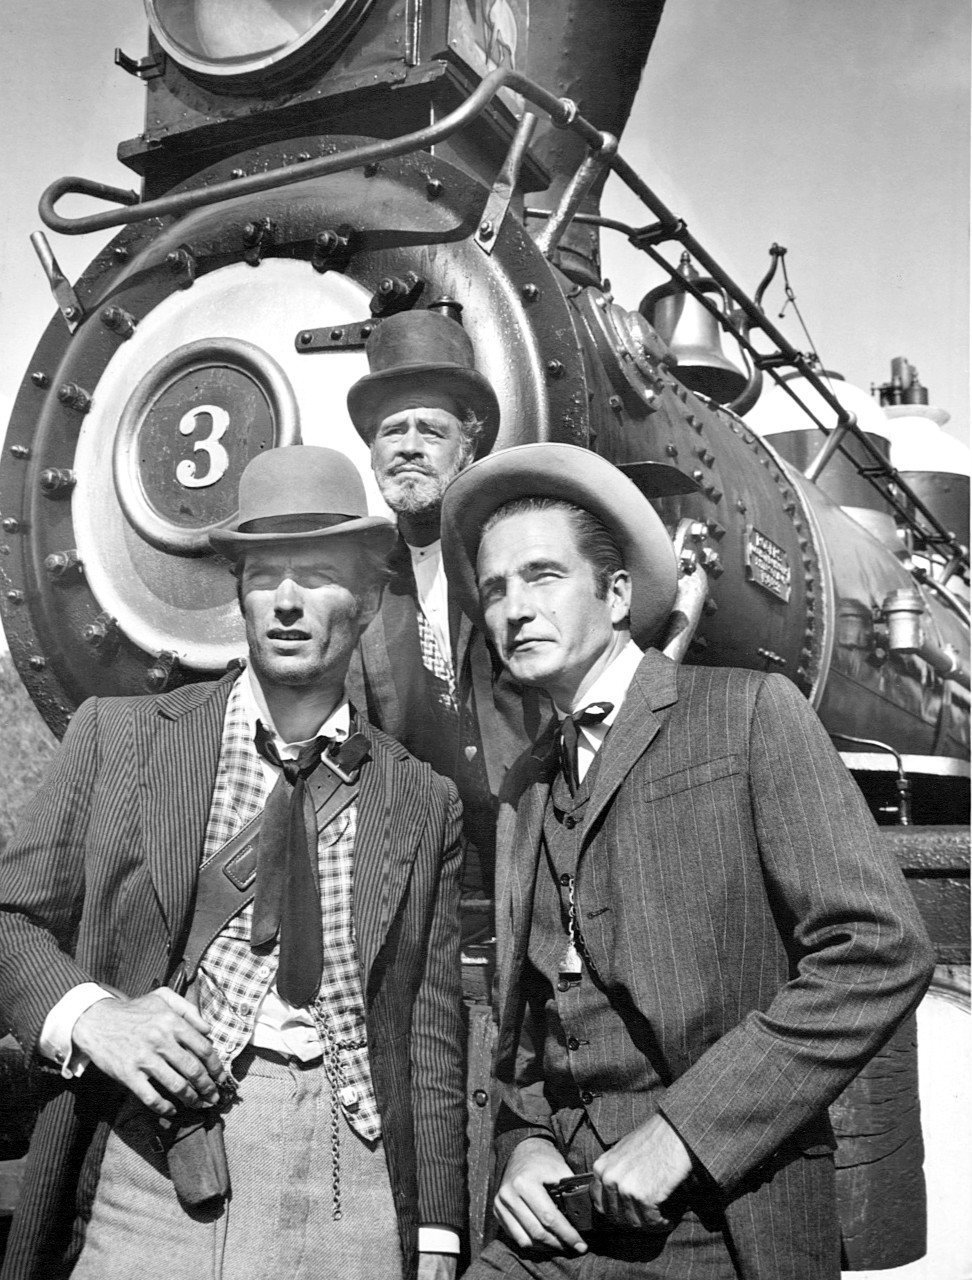 Photo of Clint Eastwood, Paul Brinegar, and Eric Fleming from the television program "Rawhide," circa 1950s. | Photo: Wikimedia Commons